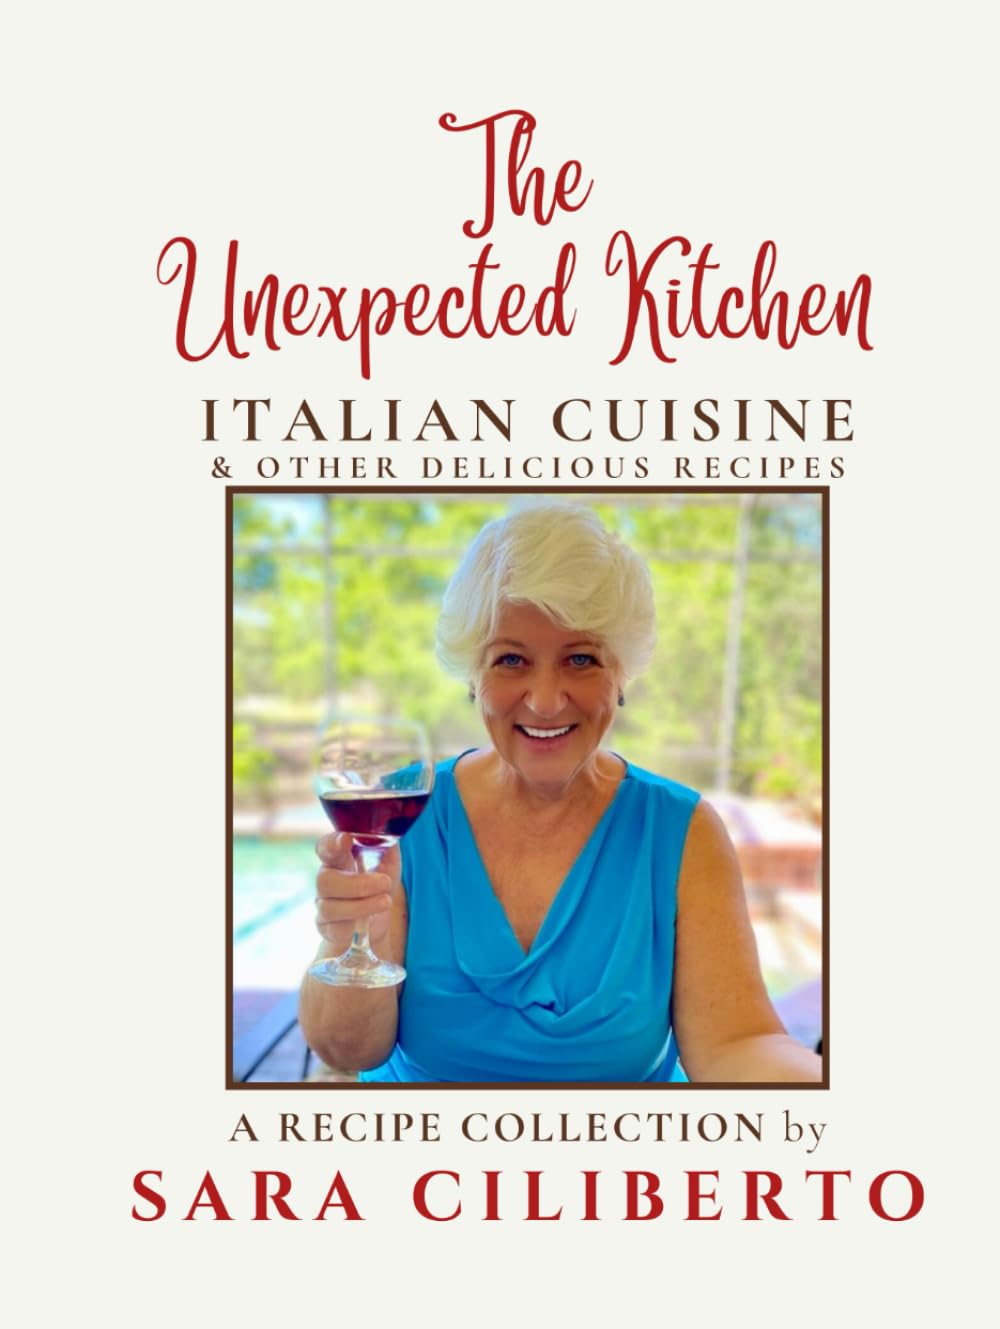 The Unexpected Kitchen, Italian Cuisine & Other Delicious Recipes